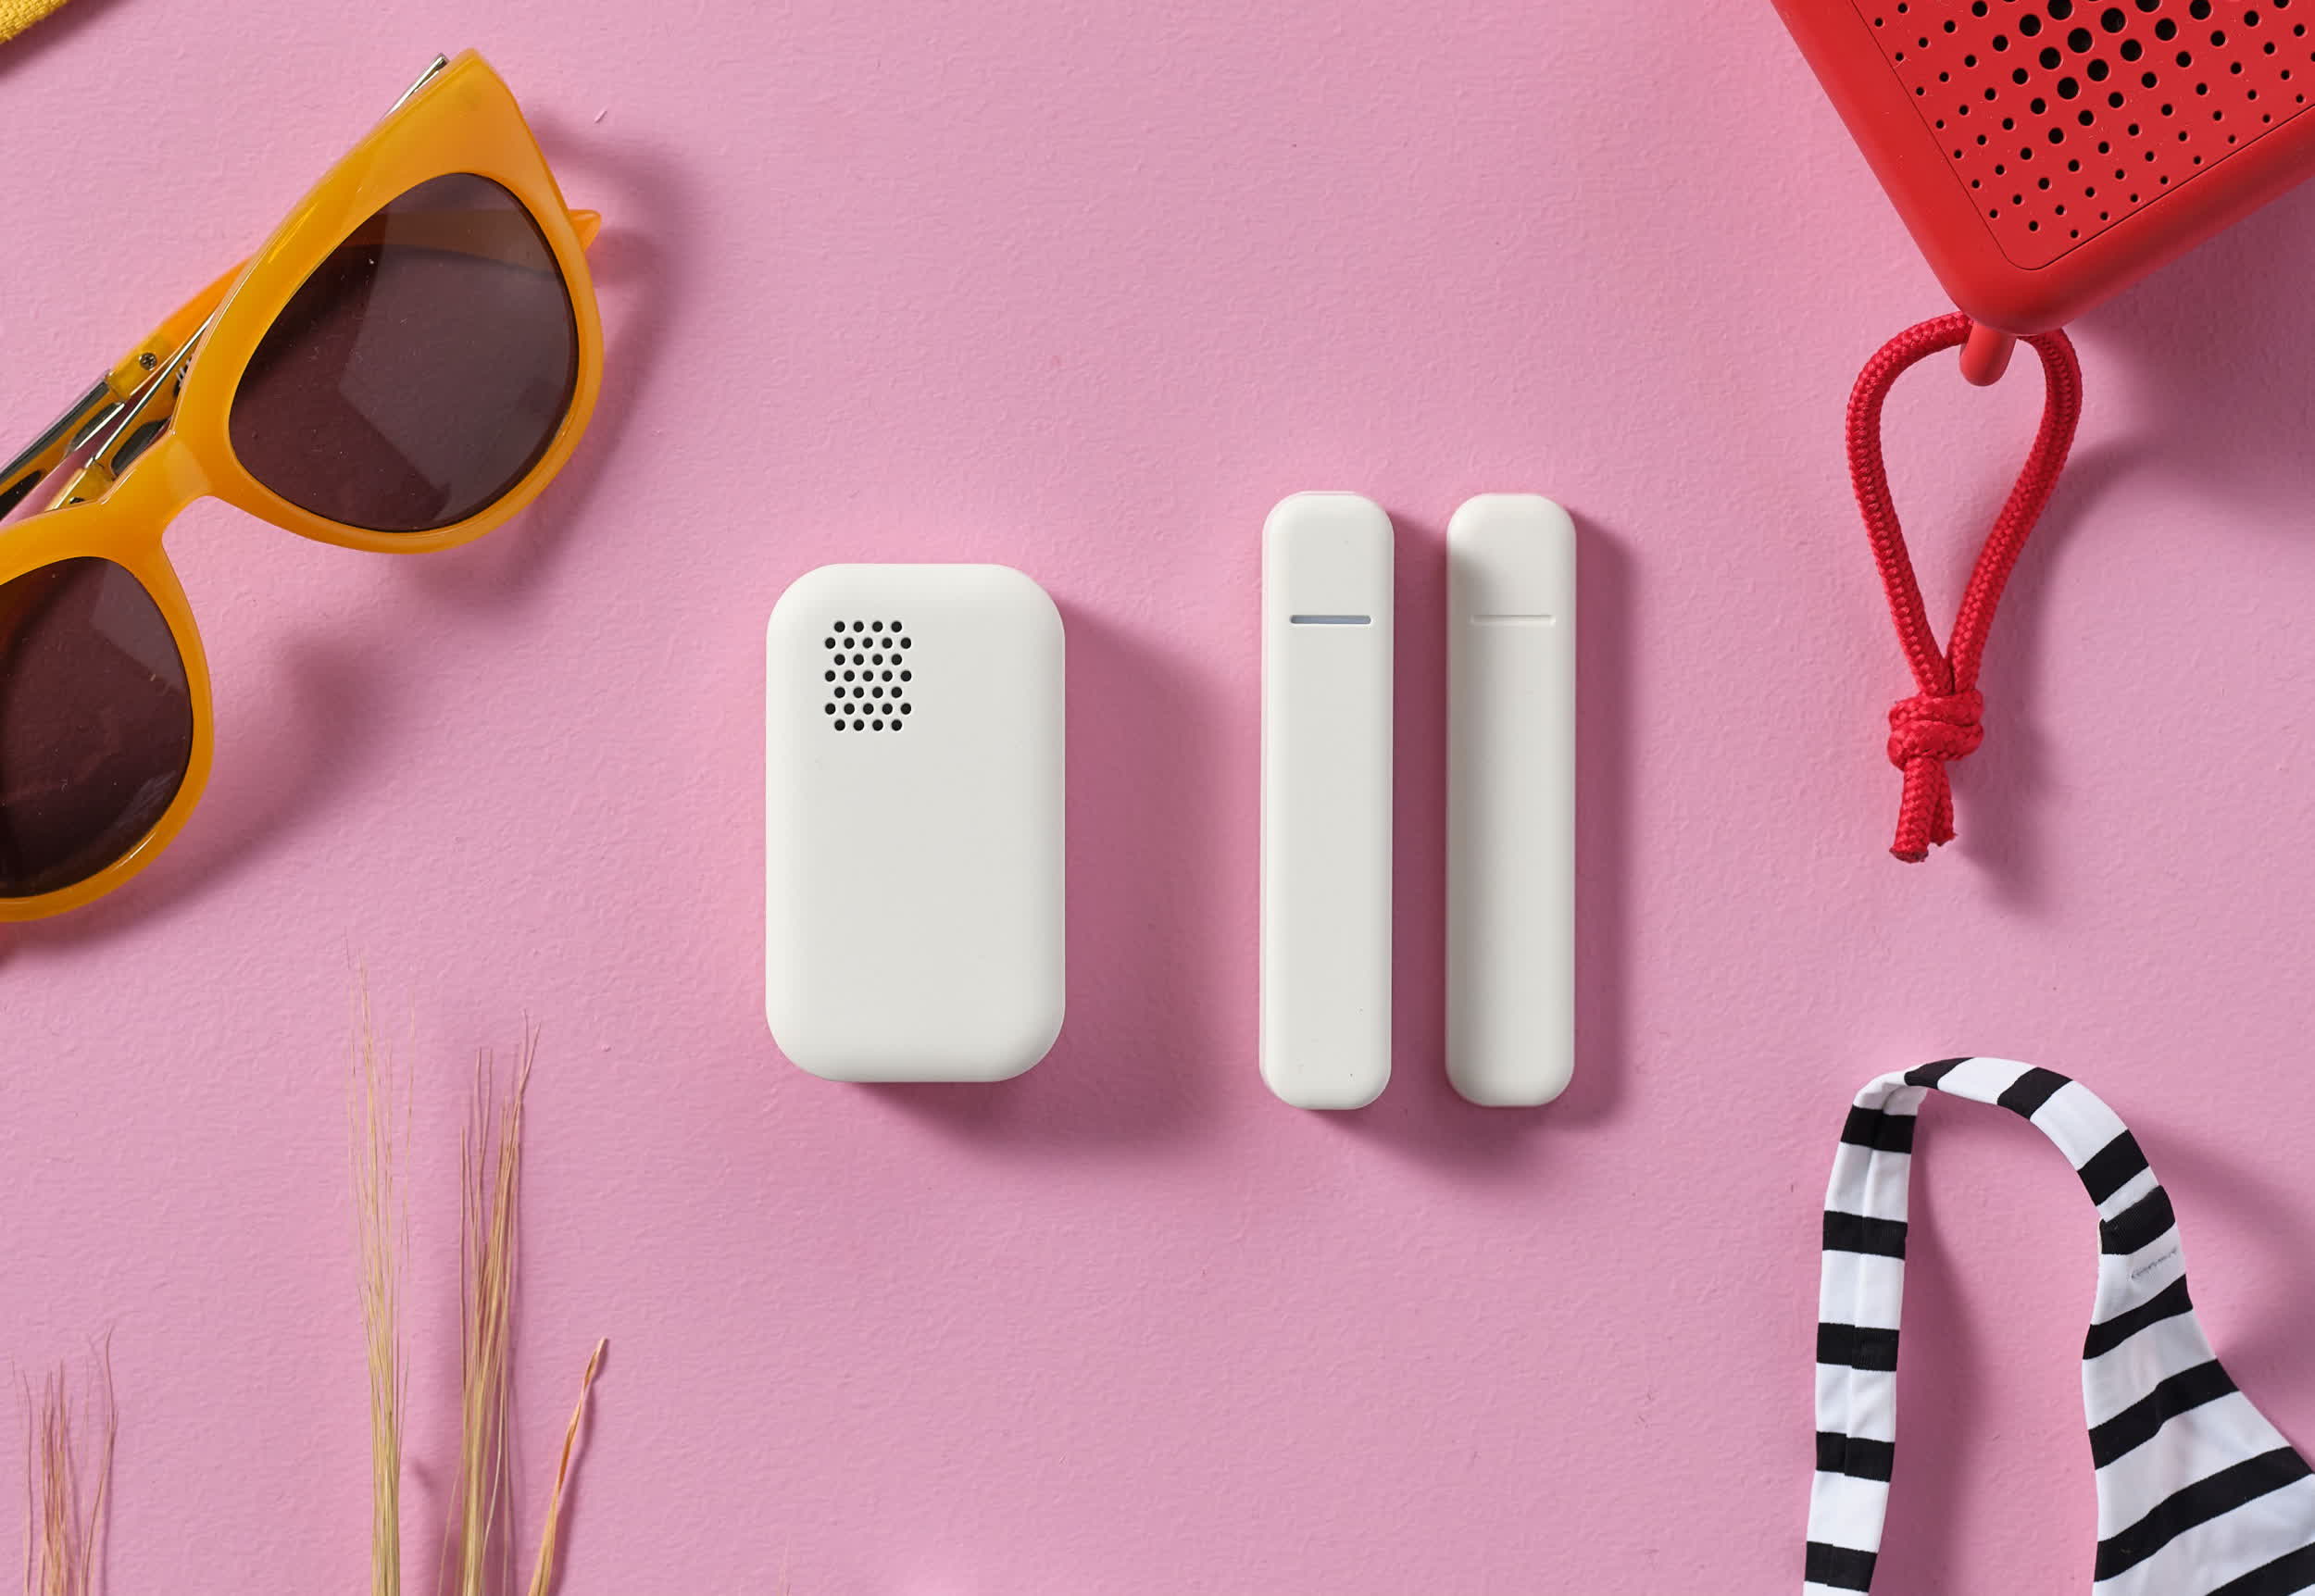 Ikea enters the Smart Home market with three new affordable sensors